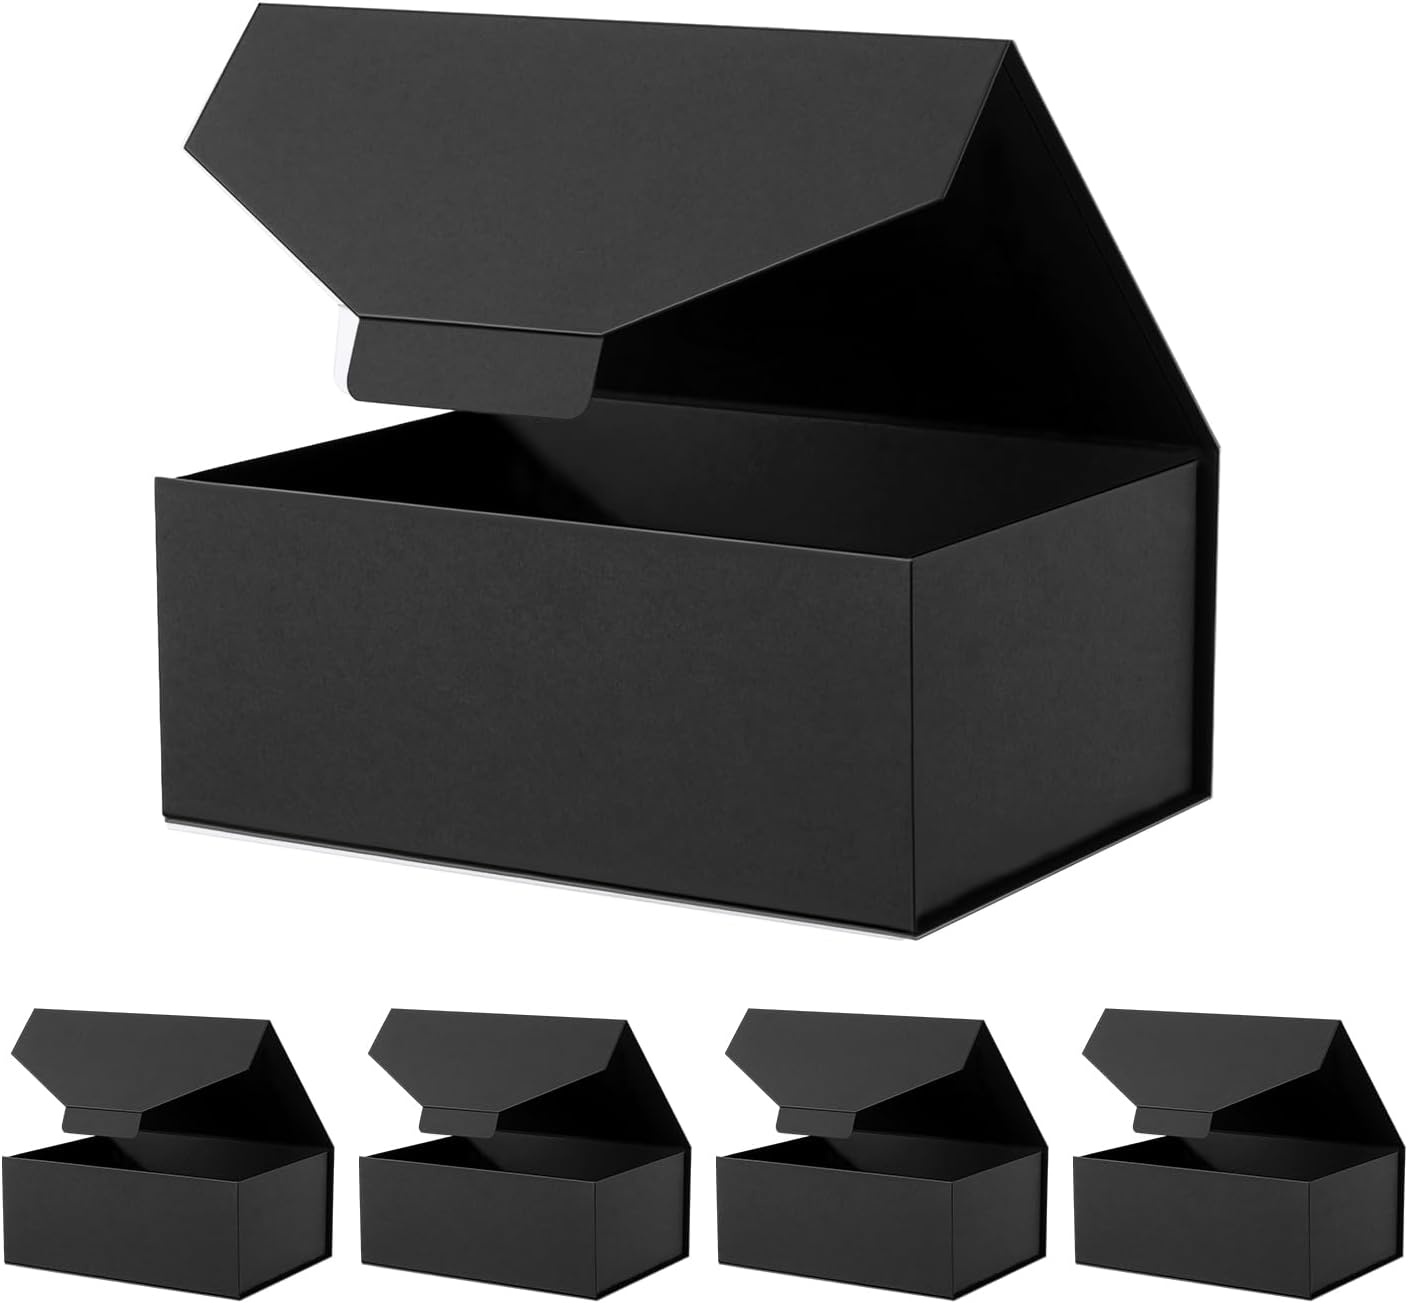 JINGUAN 5 Black Gift Boxes with Lids 9x6.5x3.8 Inches, Reusable Collapsible Gift Boxes, Groomsman Proposal Boxes, Wedding, Birthday Gift Packaging(No Magnetic, No stickers, Matte)